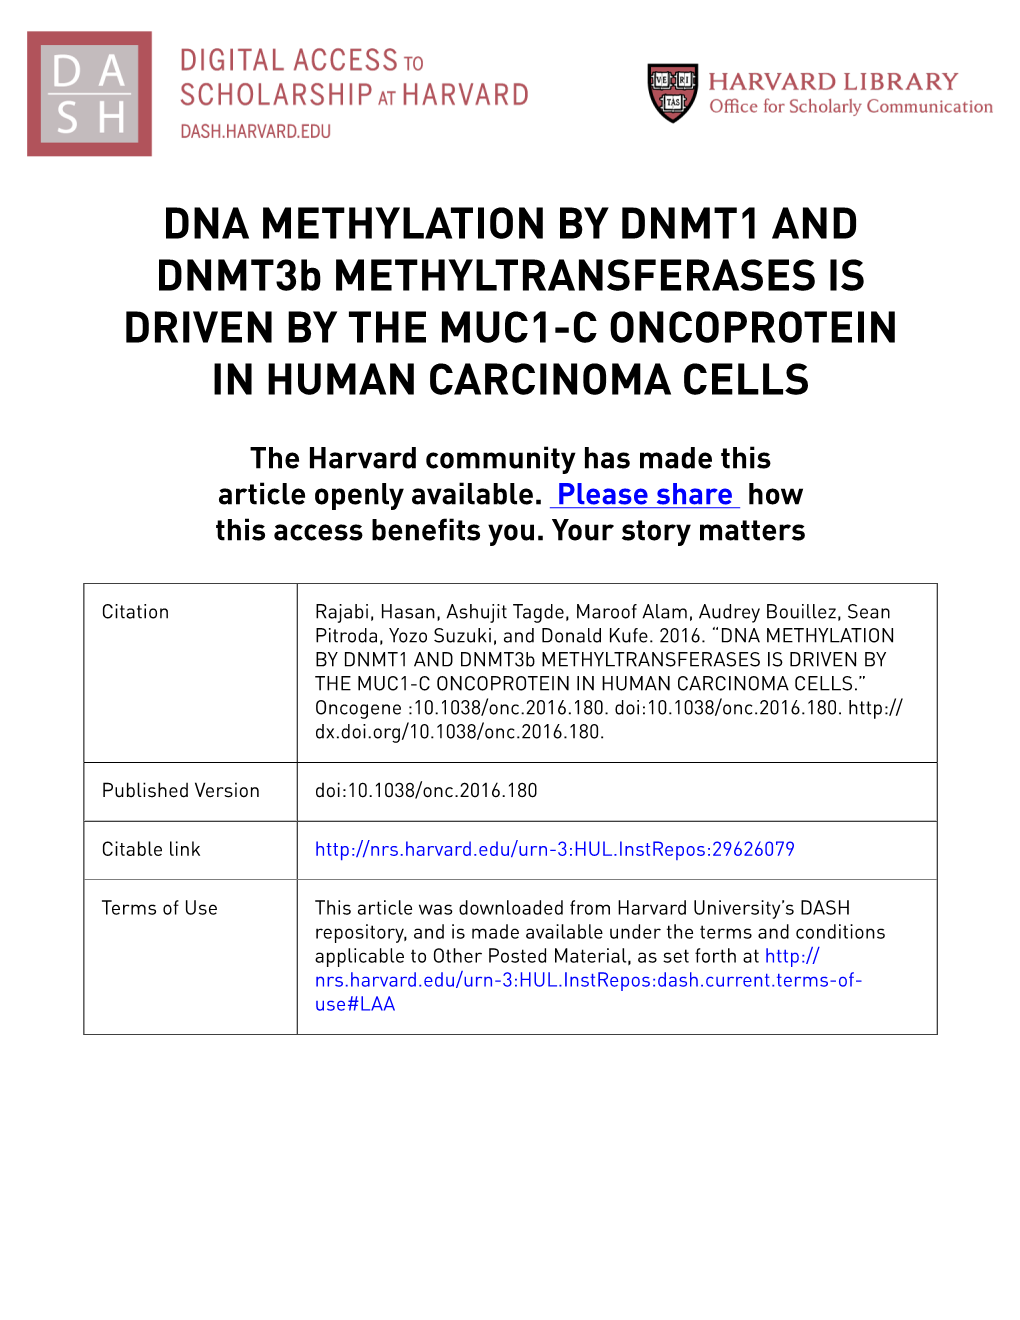 DNA METHYLATION by DNMT1 and Dnmt3b METHYLTRANSFERASES IS DRIVEN by the MUC1-C ONCOPROTEIN in HUMAN CARCINOMA CELLS